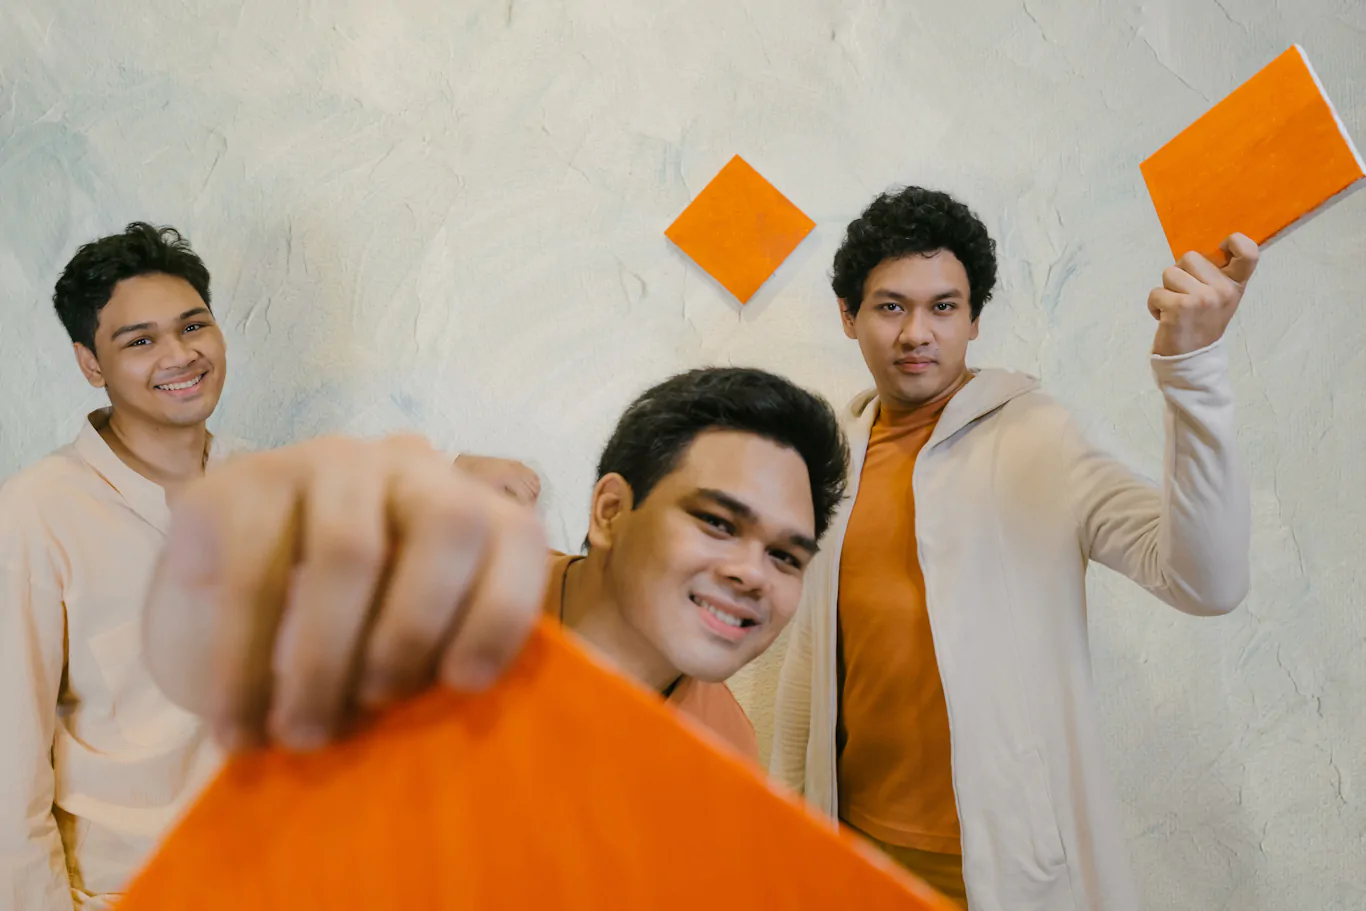 VIDEO PREMIERE: The Overtunes – Write Me Another Song